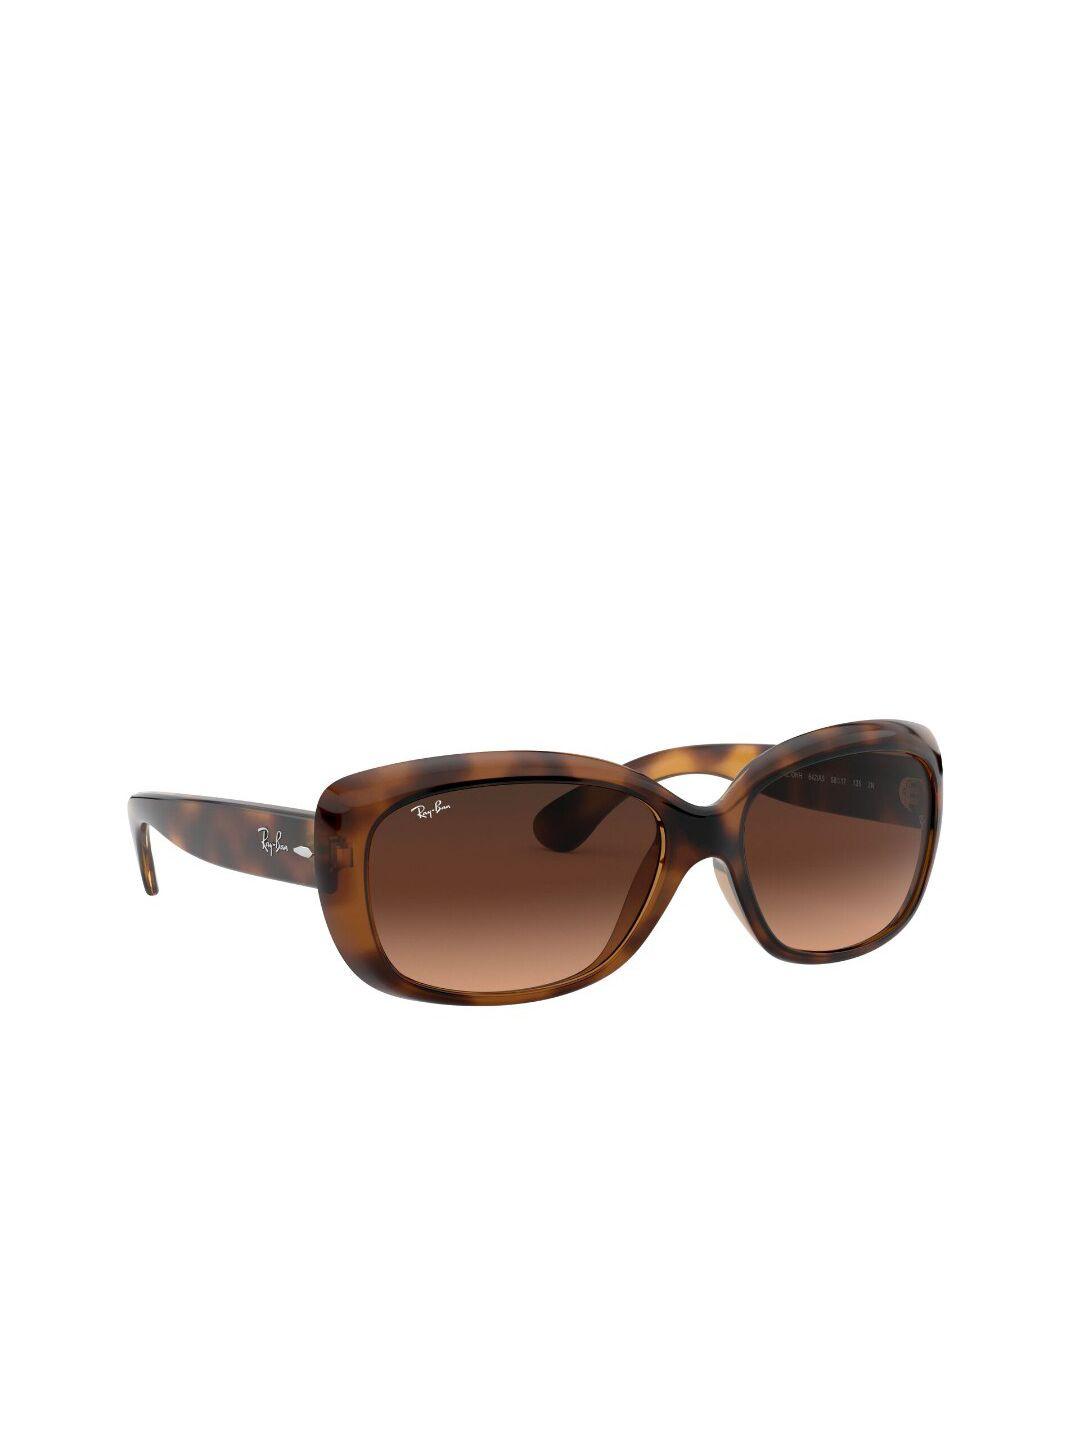 ray-ban-women-butterfly-sunglasses-with-polarised-lens-8056597210812